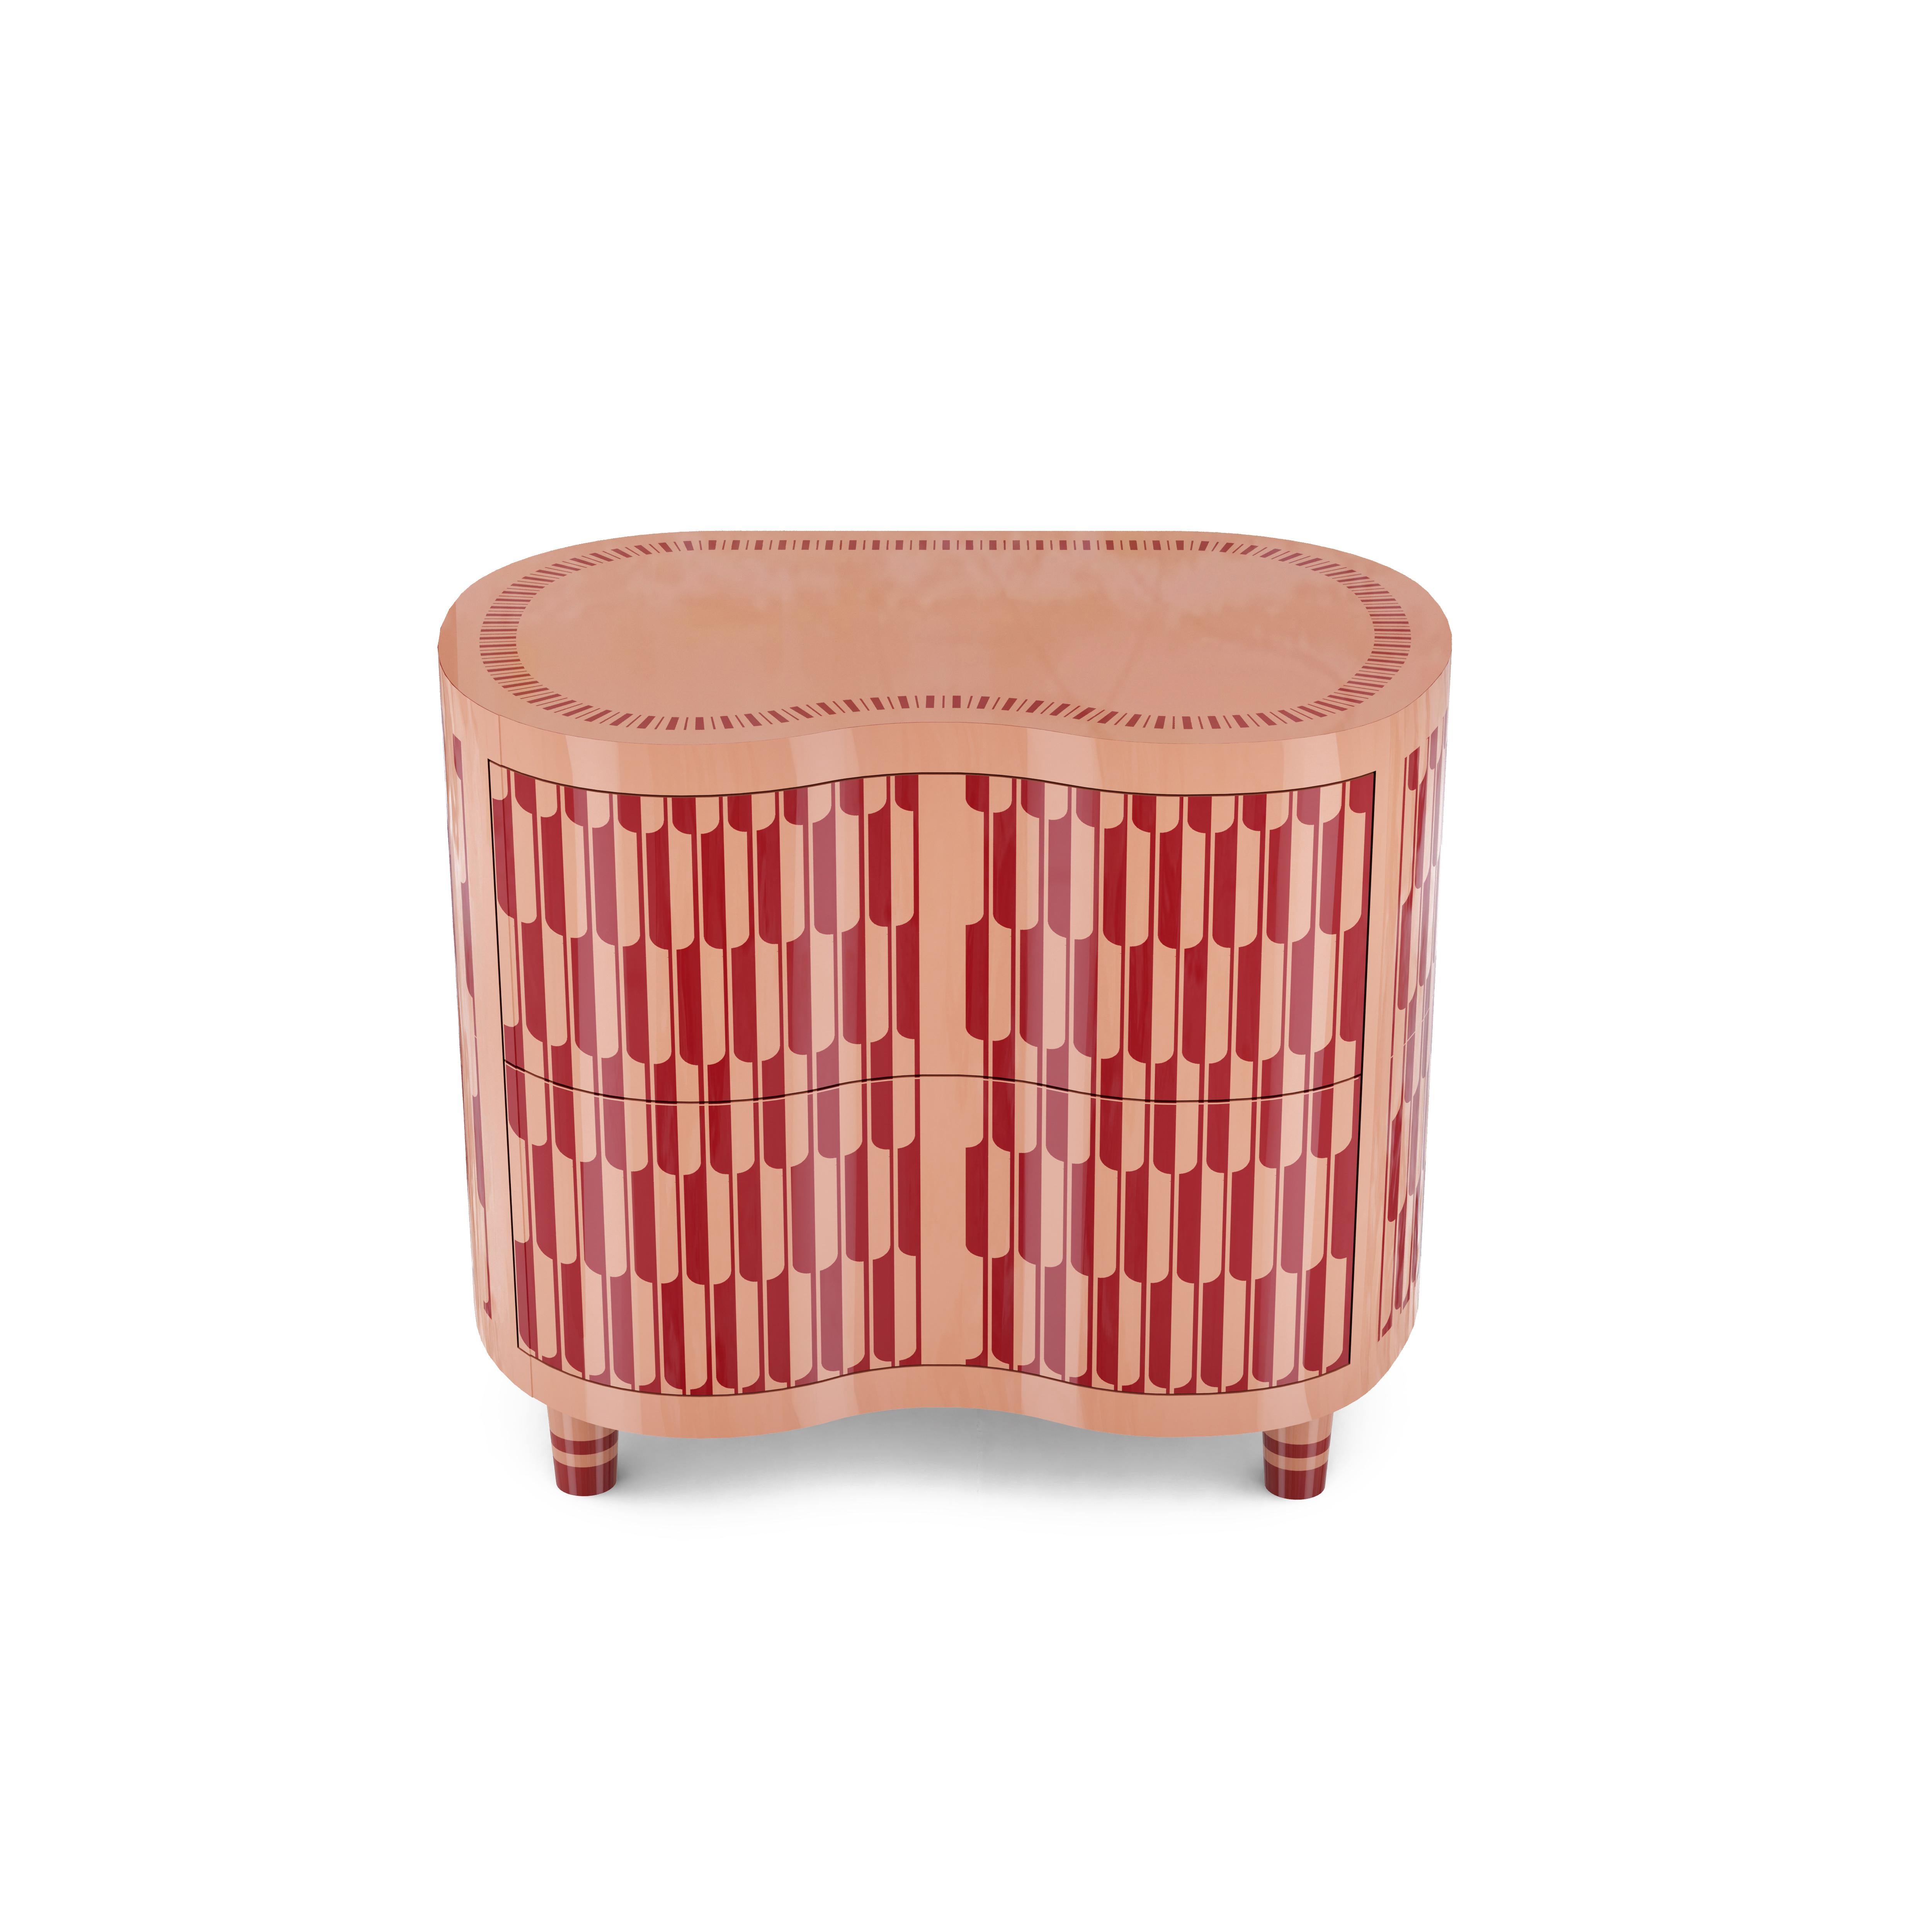 The Kid Peach Bed Side Table by Matteo Cibic is a delightful night or bedside table.

India's handicrafts are as multifarious as its cultures, and as rich as its history. The art of bone and horn inlay is omnipresent here. Artisans from the